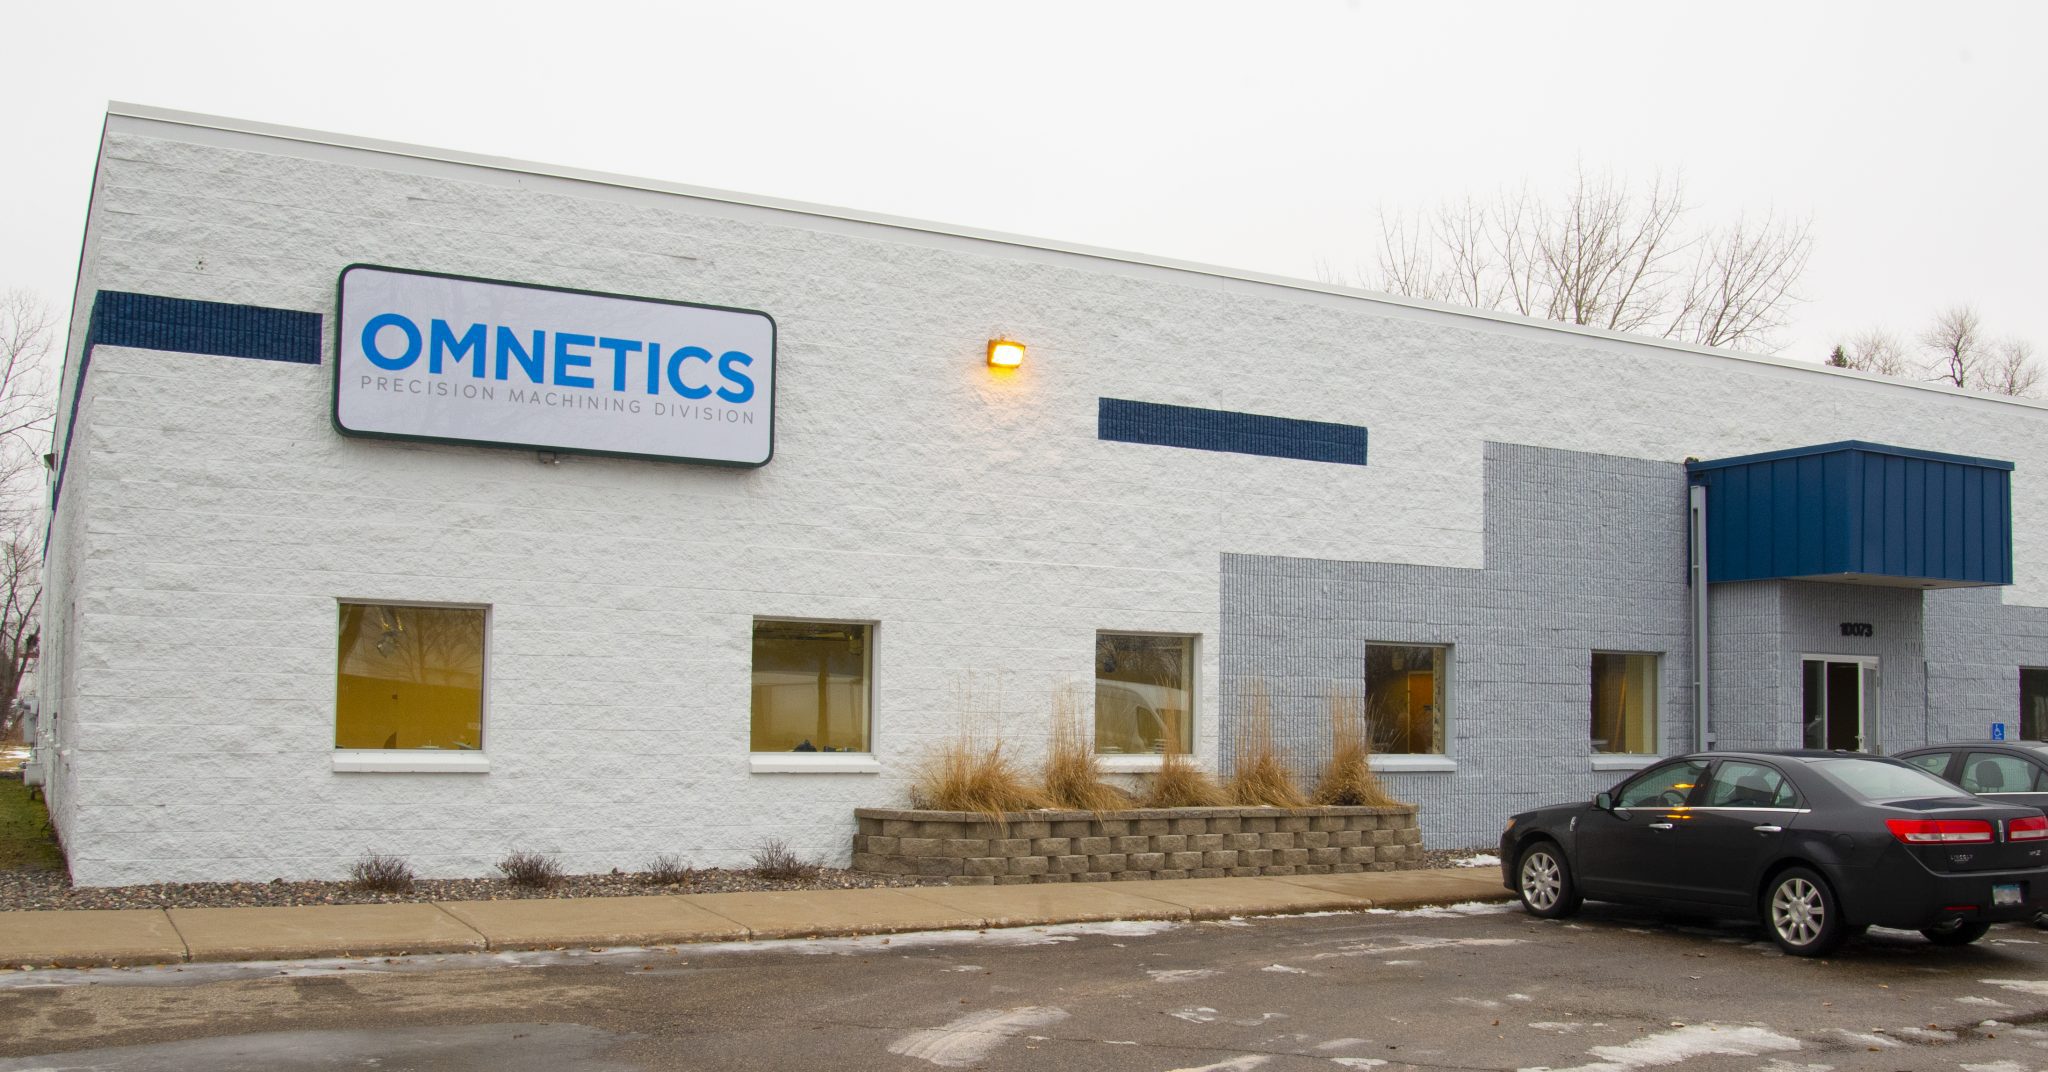 Omnetics: Relocation of the Precision Machining Division